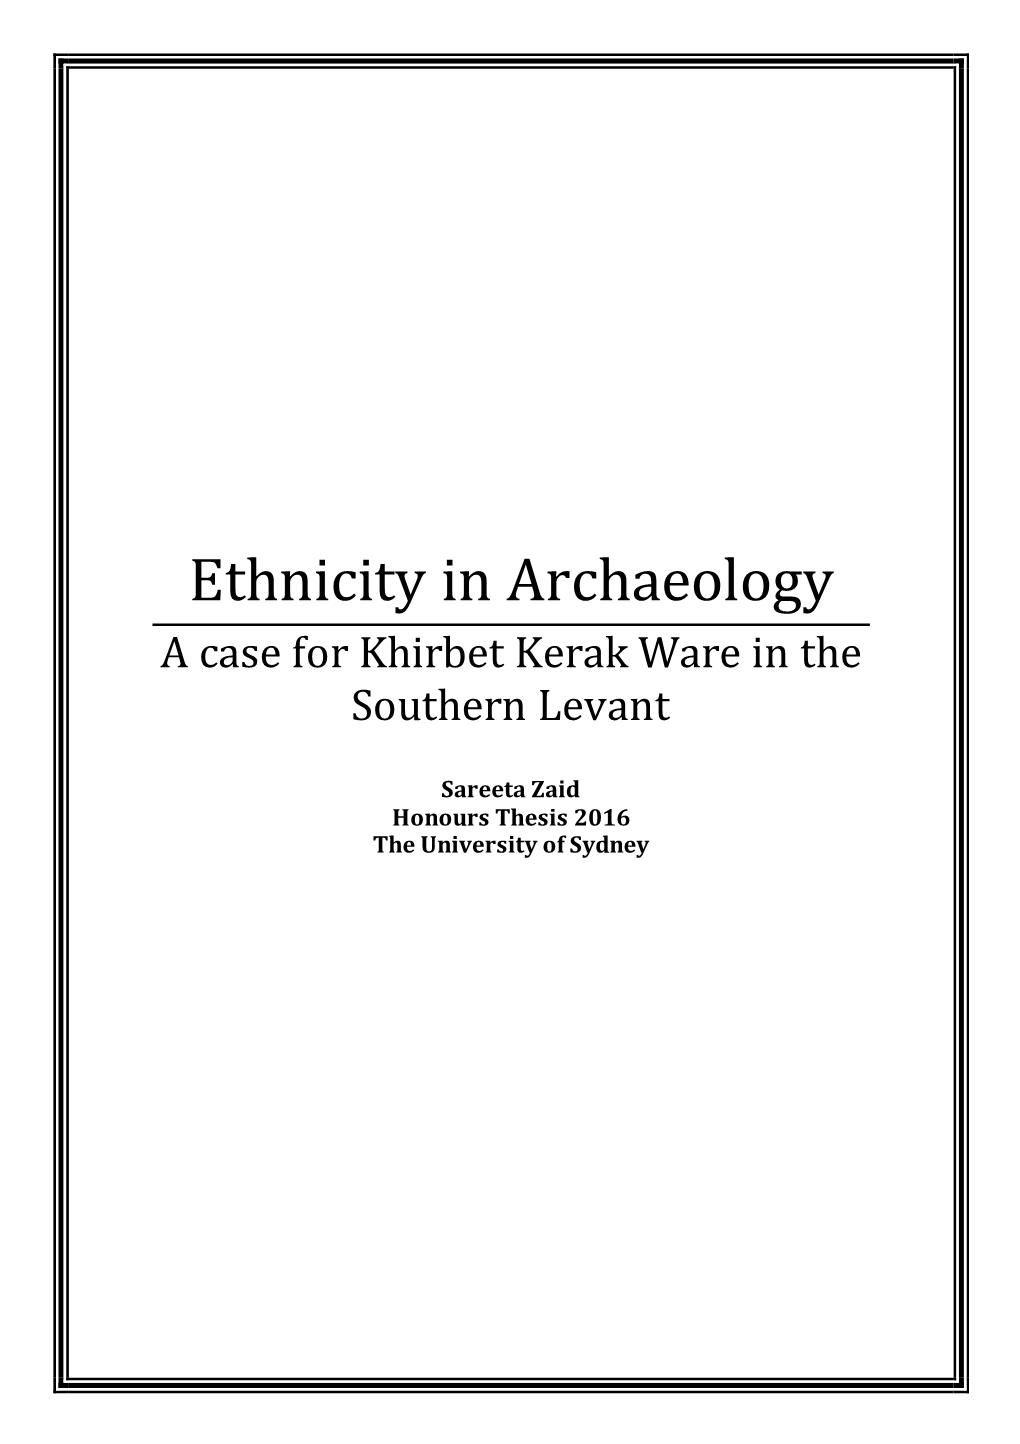 Ethnicity in Archaeology a Case for Khirbet Kerak Ware in the Southern Levant